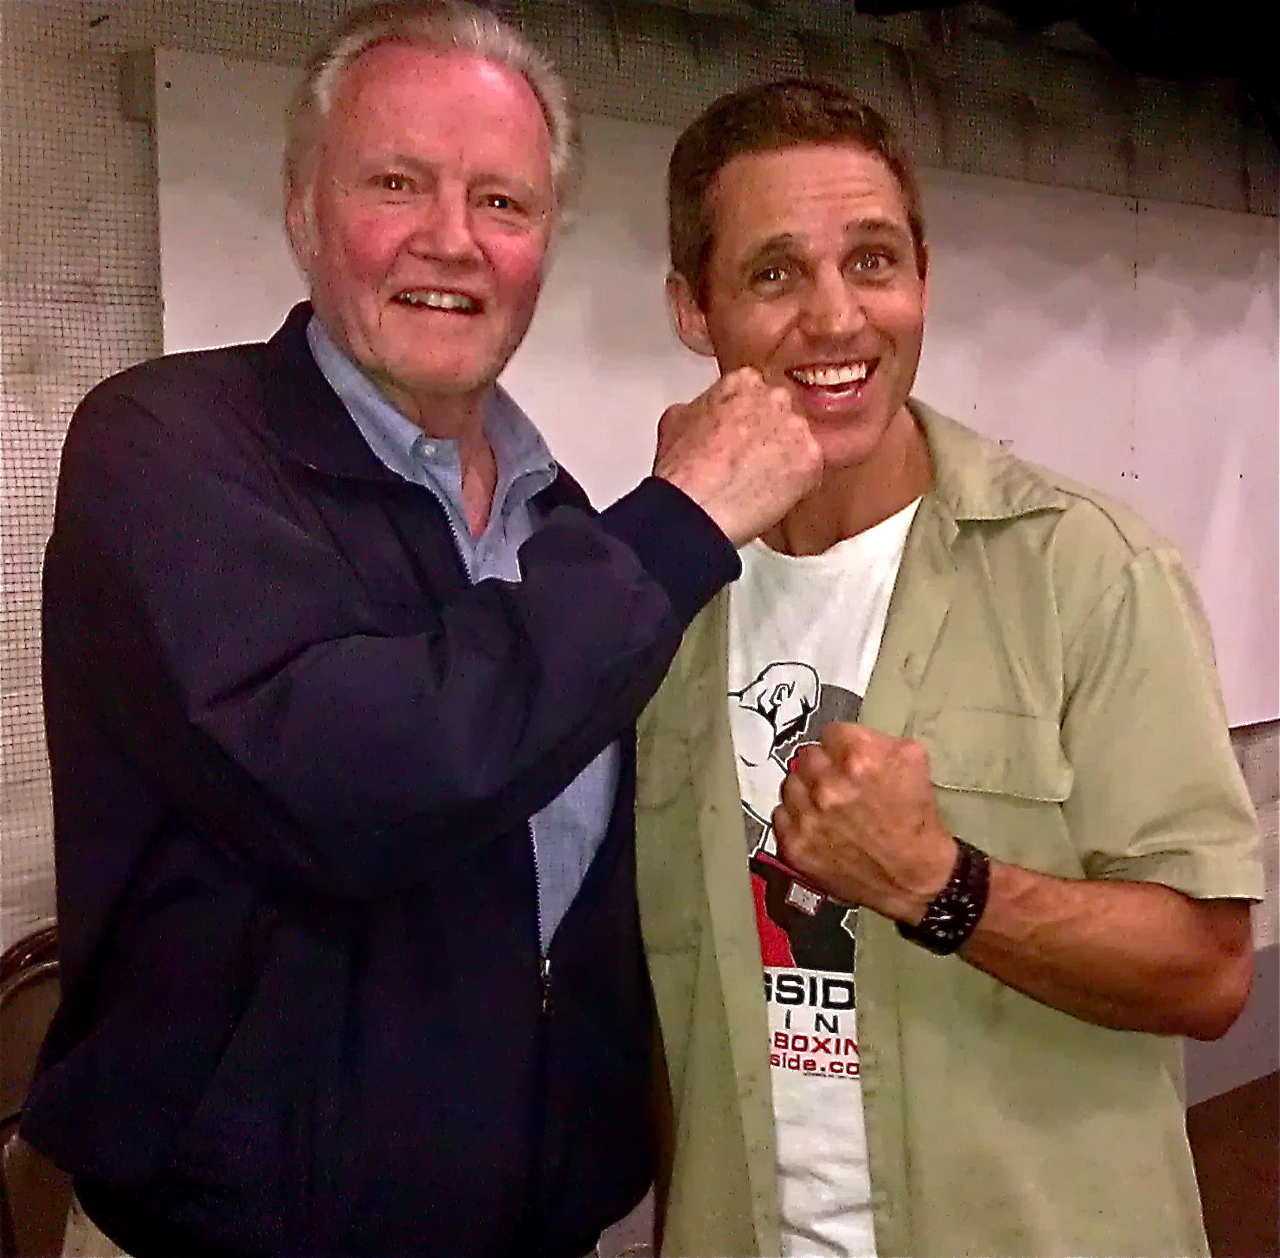 Jon Voight and Andre Brooks -Season 1, RAY DONOVAN (clowning during table-read)